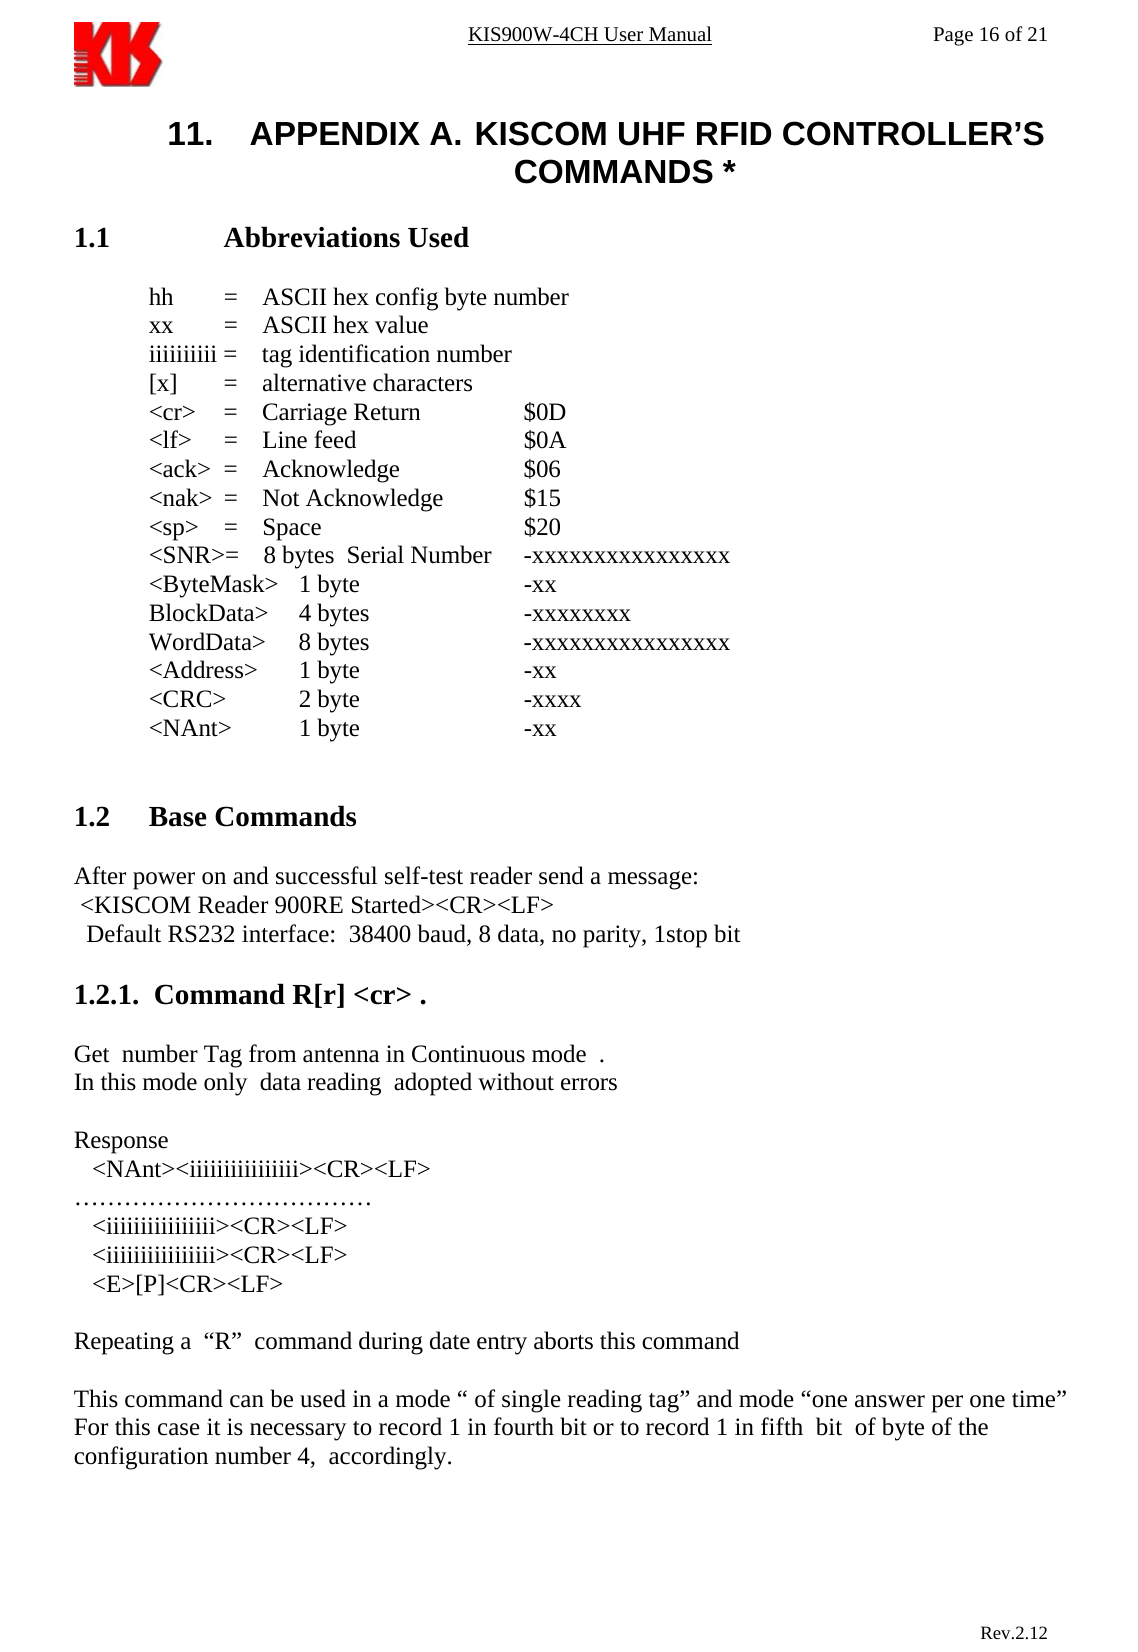 KIS900W-4CH User Manual           Page 16 of 21 11.  APPENDIX A.  KISCOM UHF RFID CONTROLLER’S COMMANDS *  1.1     Abbreviations Used  hh   =    ASCII hex config byte number  xx   =    ASCII hex value iiiiiiiiii =    tag identification number [x]  =    alternative characters &lt;cr&gt;  =    Carriage Return    $0D &lt;lf&gt;  =    Line feed      $0A &lt;ack&gt;  =    Acknowledge           $06 &lt;nak&gt;  =    Not Acknowledge       $15 &lt;sp&gt;  =    Space                   $20 &lt;SNR&gt;=    8 bytes  Serial Number   -xxxxxxxxxxxxxxxx &lt;ByteMask&gt; 1 byte   -xx BlockData&gt;  4 bytes   -xxxxxxxx WordData&gt;   8 bytes     -xxxxxxxxxxxxxxxx &lt;Address&gt;  1 byte   -xx &lt;CRC&gt; 2 byte   -xxxx &lt;NAnt&gt;  1 byte      -xx       1.2 Base Commands  After power on and successful self-test reader send a message:  &lt;KISCOM Reader 900RE Started&gt;&lt;CR&gt;&lt;LF&gt;   Default RS232 interface:  38400 baud, 8 data, no parity, 1stop bit  1.2.1.  Command R[r] &lt;cr&gt; .  Get  number Tag from antenna in Continuous mode  . In this mode only  data reading  adopted without errors  Response    &lt;NAnt&gt;&lt;iiiiiiiiiiiiiiii&gt;&lt;CR&gt;&lt;LF&gt; ………………………………    &lt;iiiiiiiiiiiiiiii&gt;&lt;CR&gt;&lt;LF&gt;    &lt;iiiiiiiiiiiiiiii&gt;&lt;CR&gt;&lt;LF&gt;    &lt;E&gt;[P]&lt;CR&gt;&lt;LF&gt;  Repeating a  “R”  command during date entry aborts this command  This command can be used in a mode “ of single reading tag” and mode “one answer per one time”  For this case it is necessary to record 1 in fourth bit or to record 1 in fifth  bit  of byte of the configuration number 4,  accordingly.                            Rev.2.12  